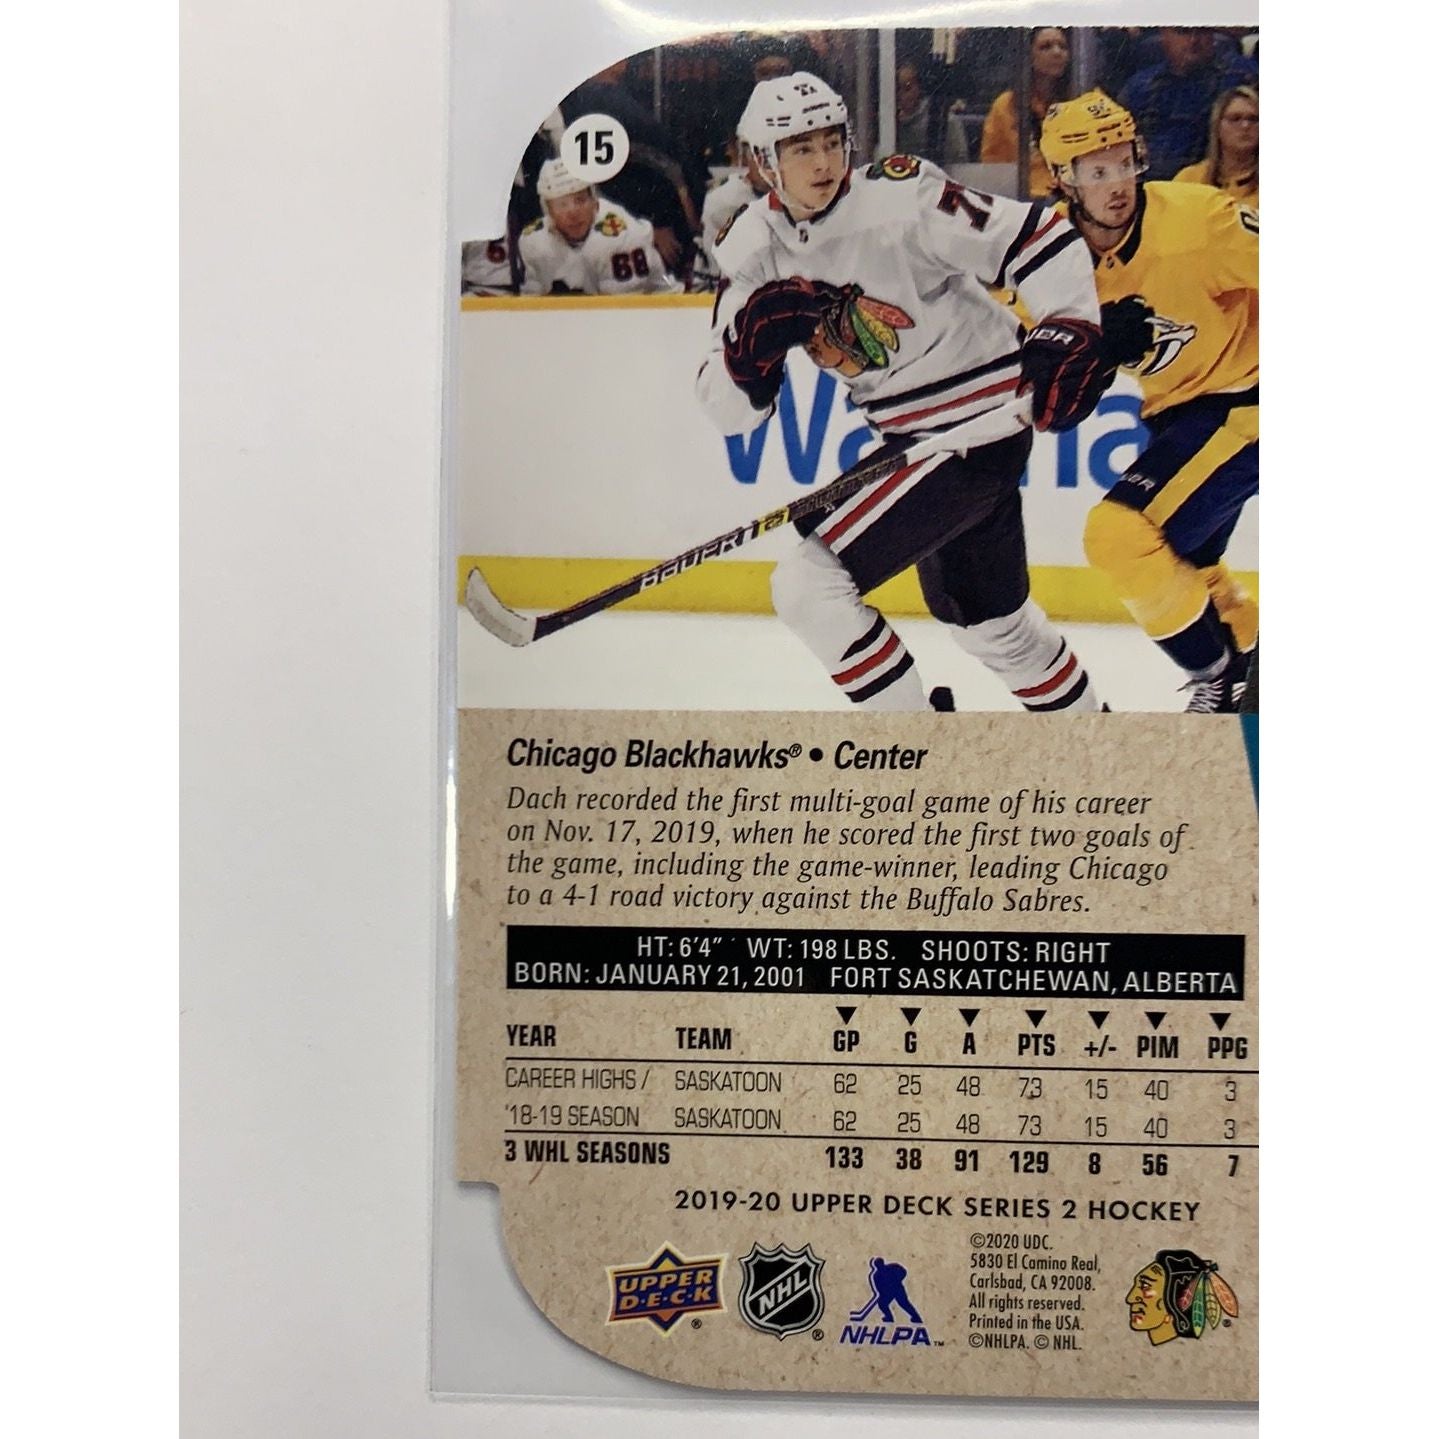  2019-20 Upper Deck Series Two Kirby Dach 95 Retro  Local Legends Cards & Collectibles